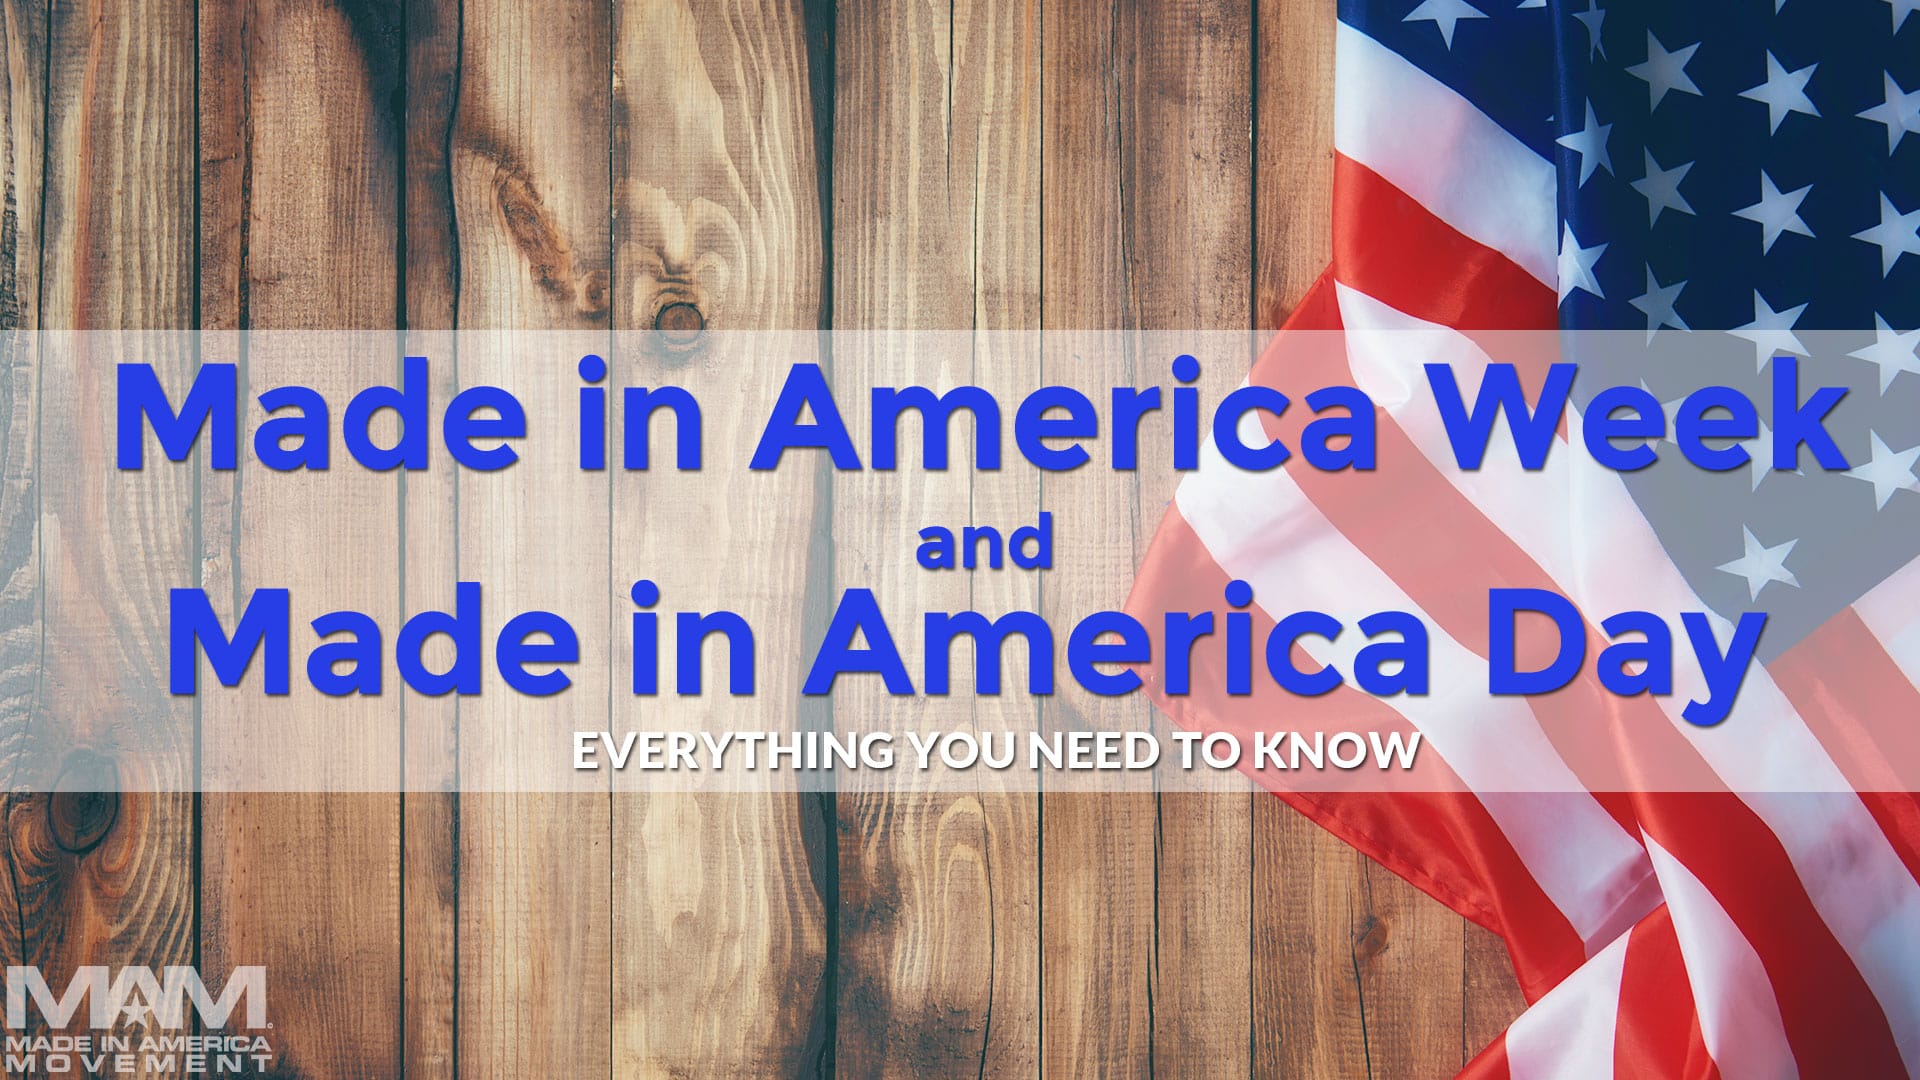 Made in America Week – The Made in America Movement